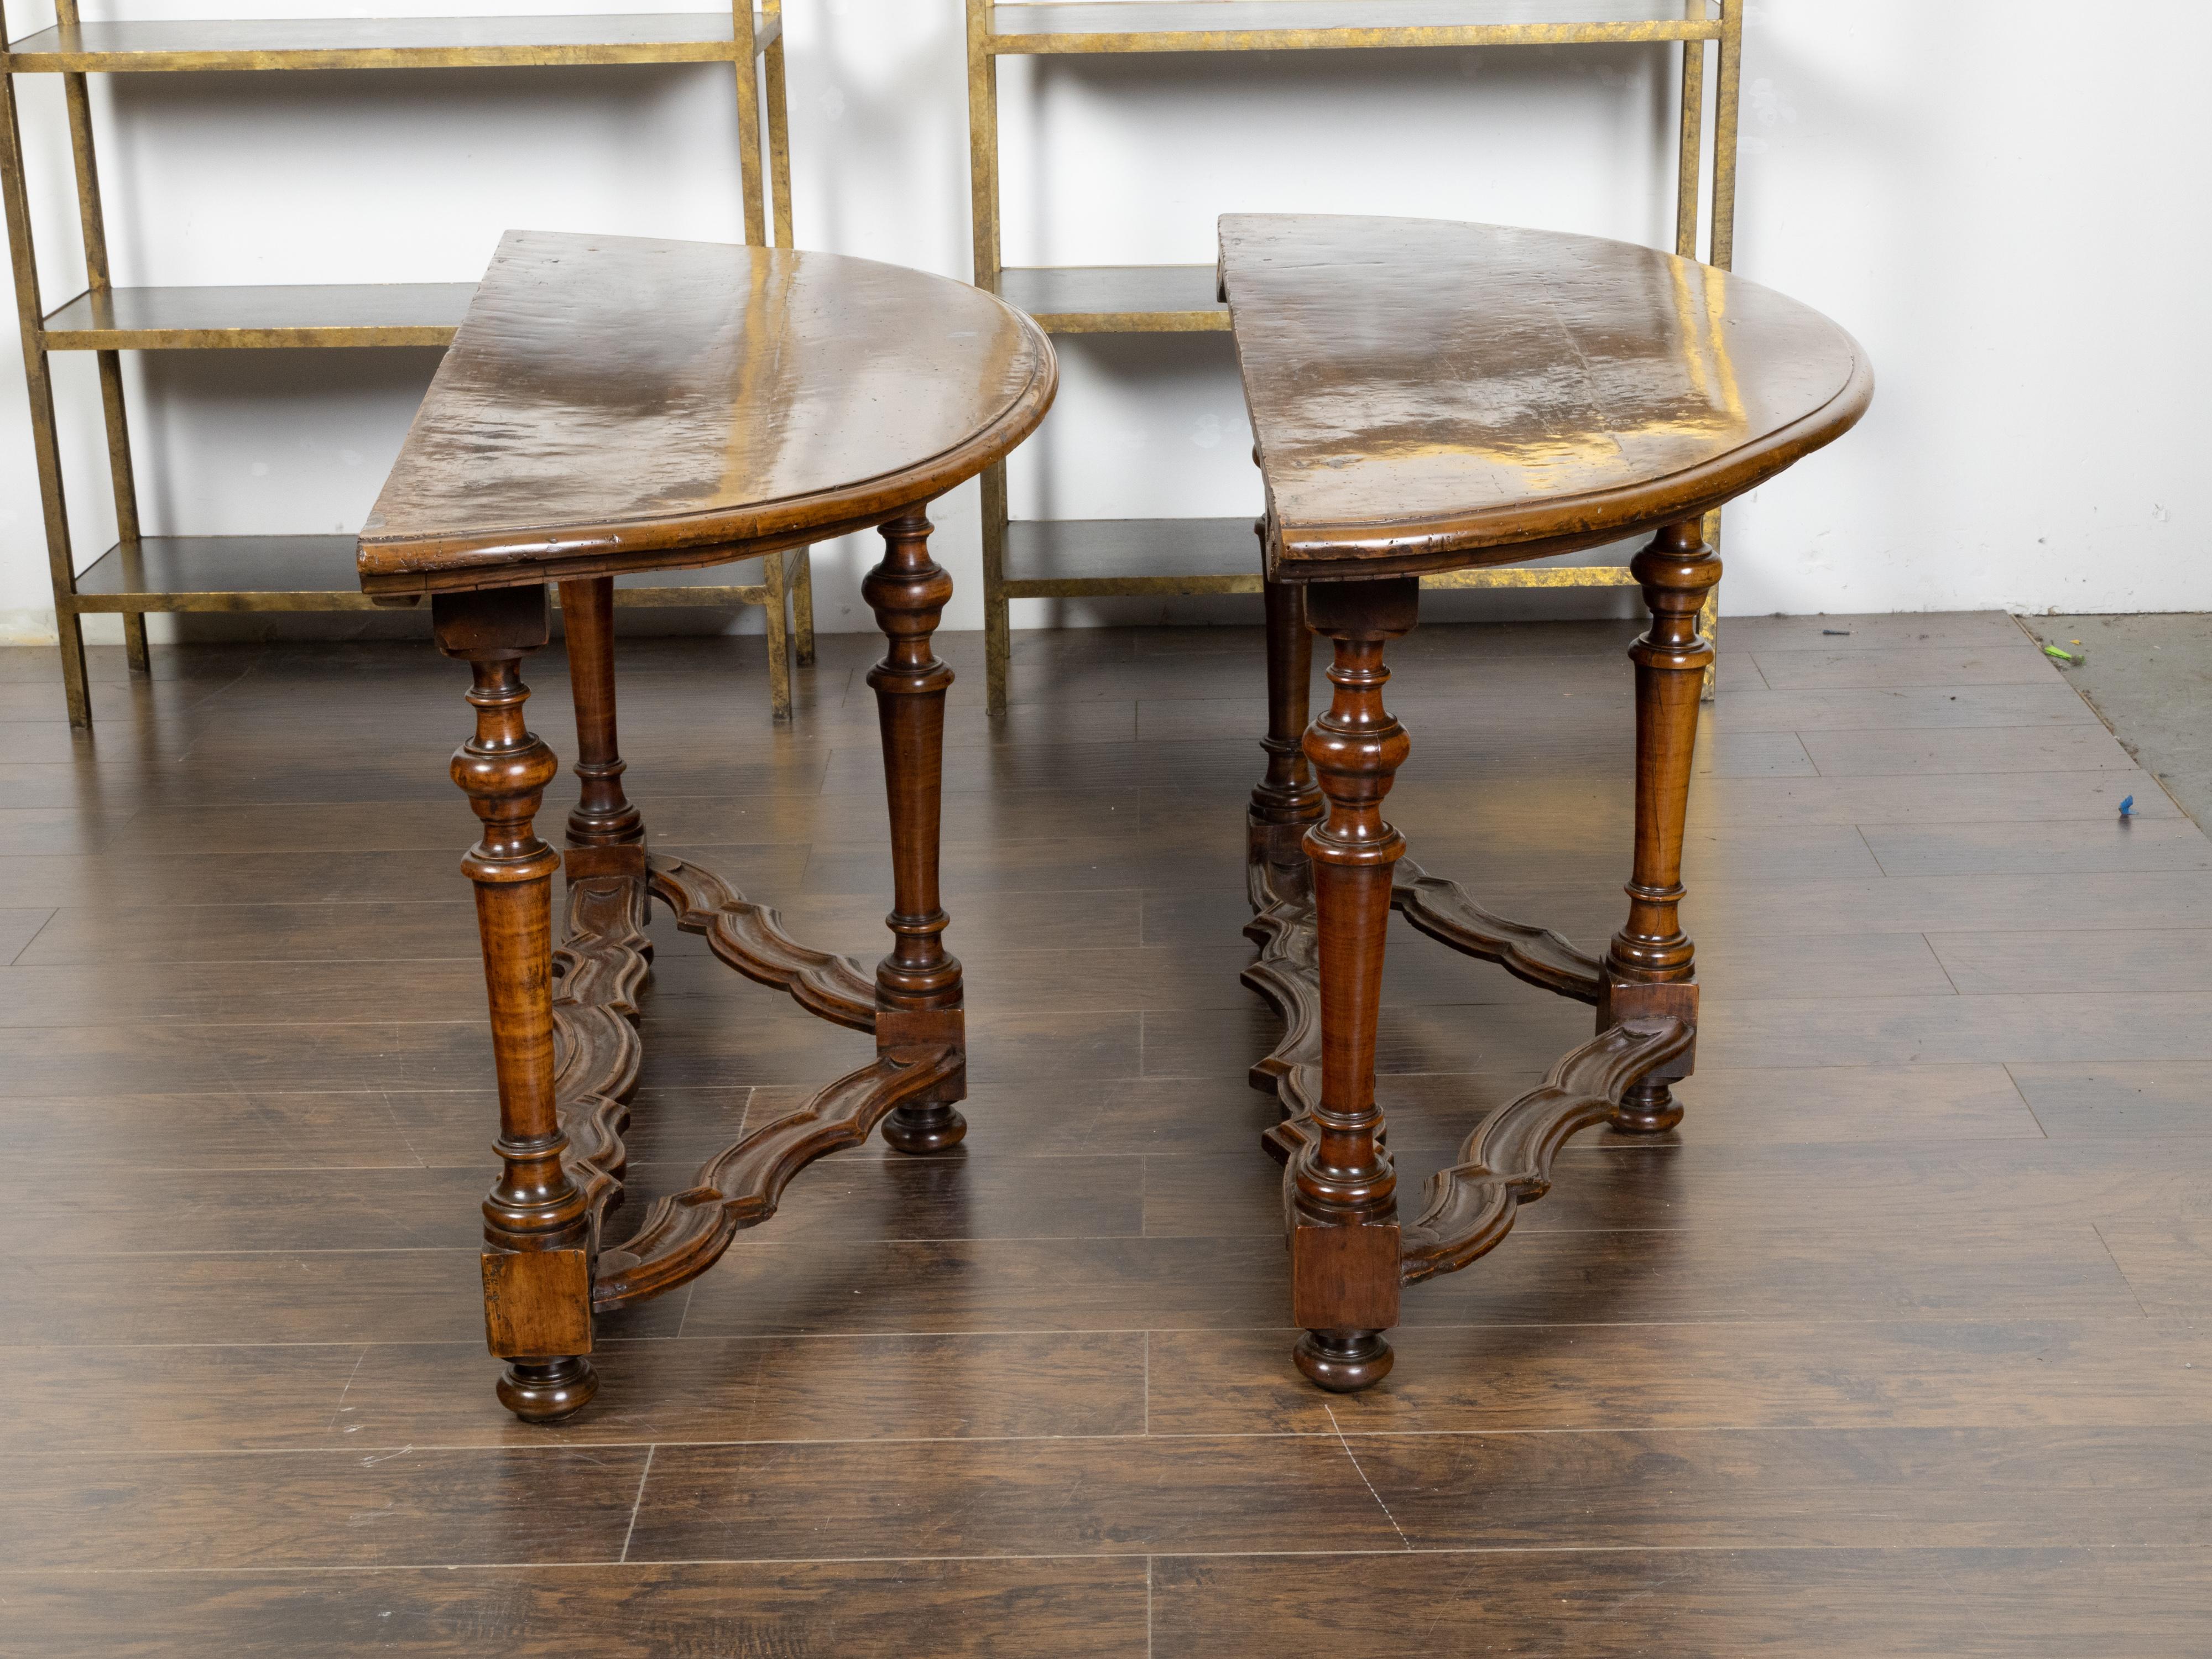 A pair of Italian Baroque style walnut demi-lune console tables from the early 19th century, with semi-circular tops, turned legs and carved stretchers. Created in Italy during the first quarter of the 19th century, each of this pair of demi-lune